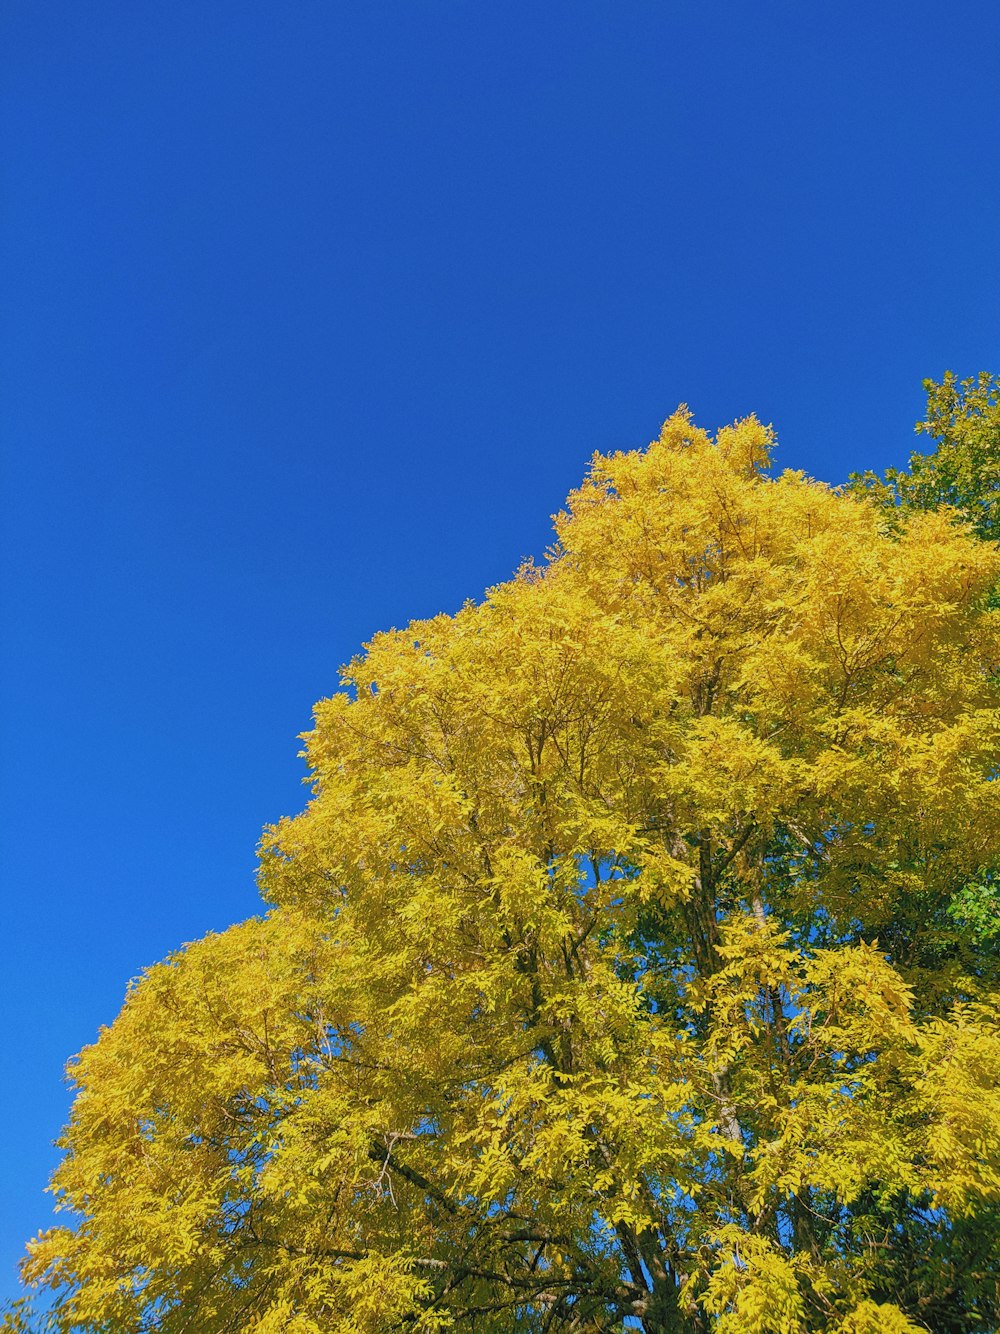 green and yellow leaf tree under blue sky during daytime